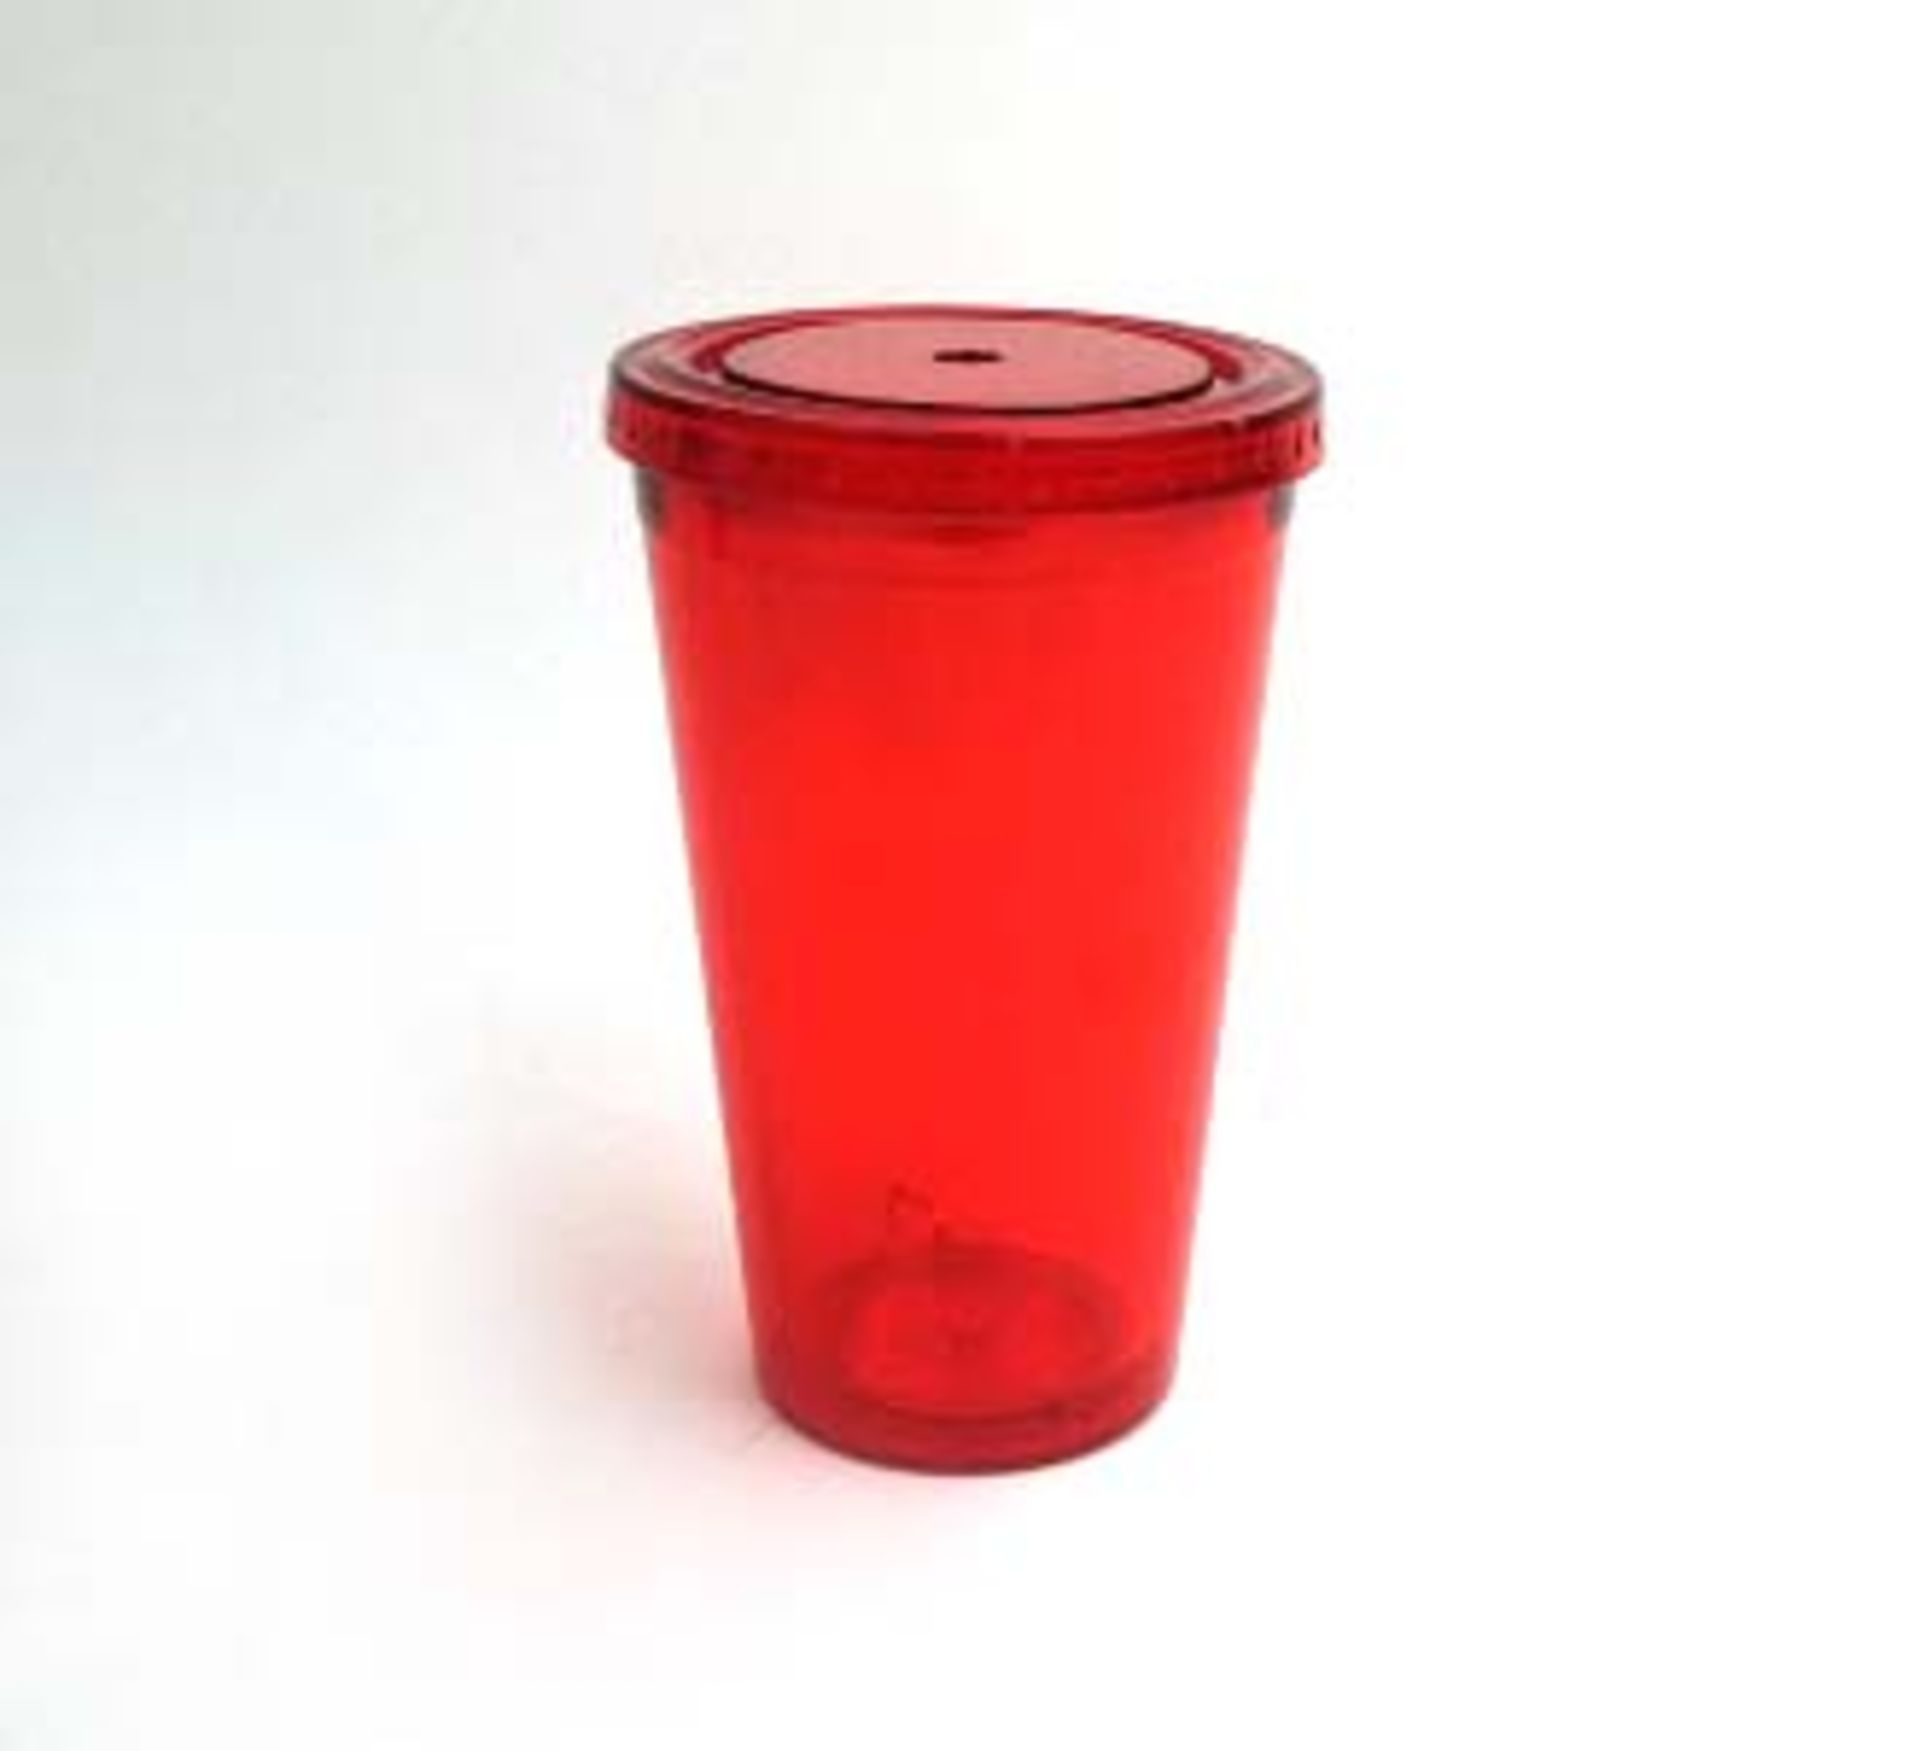 24 boxes of 24 Festival 16oz tumblers in red